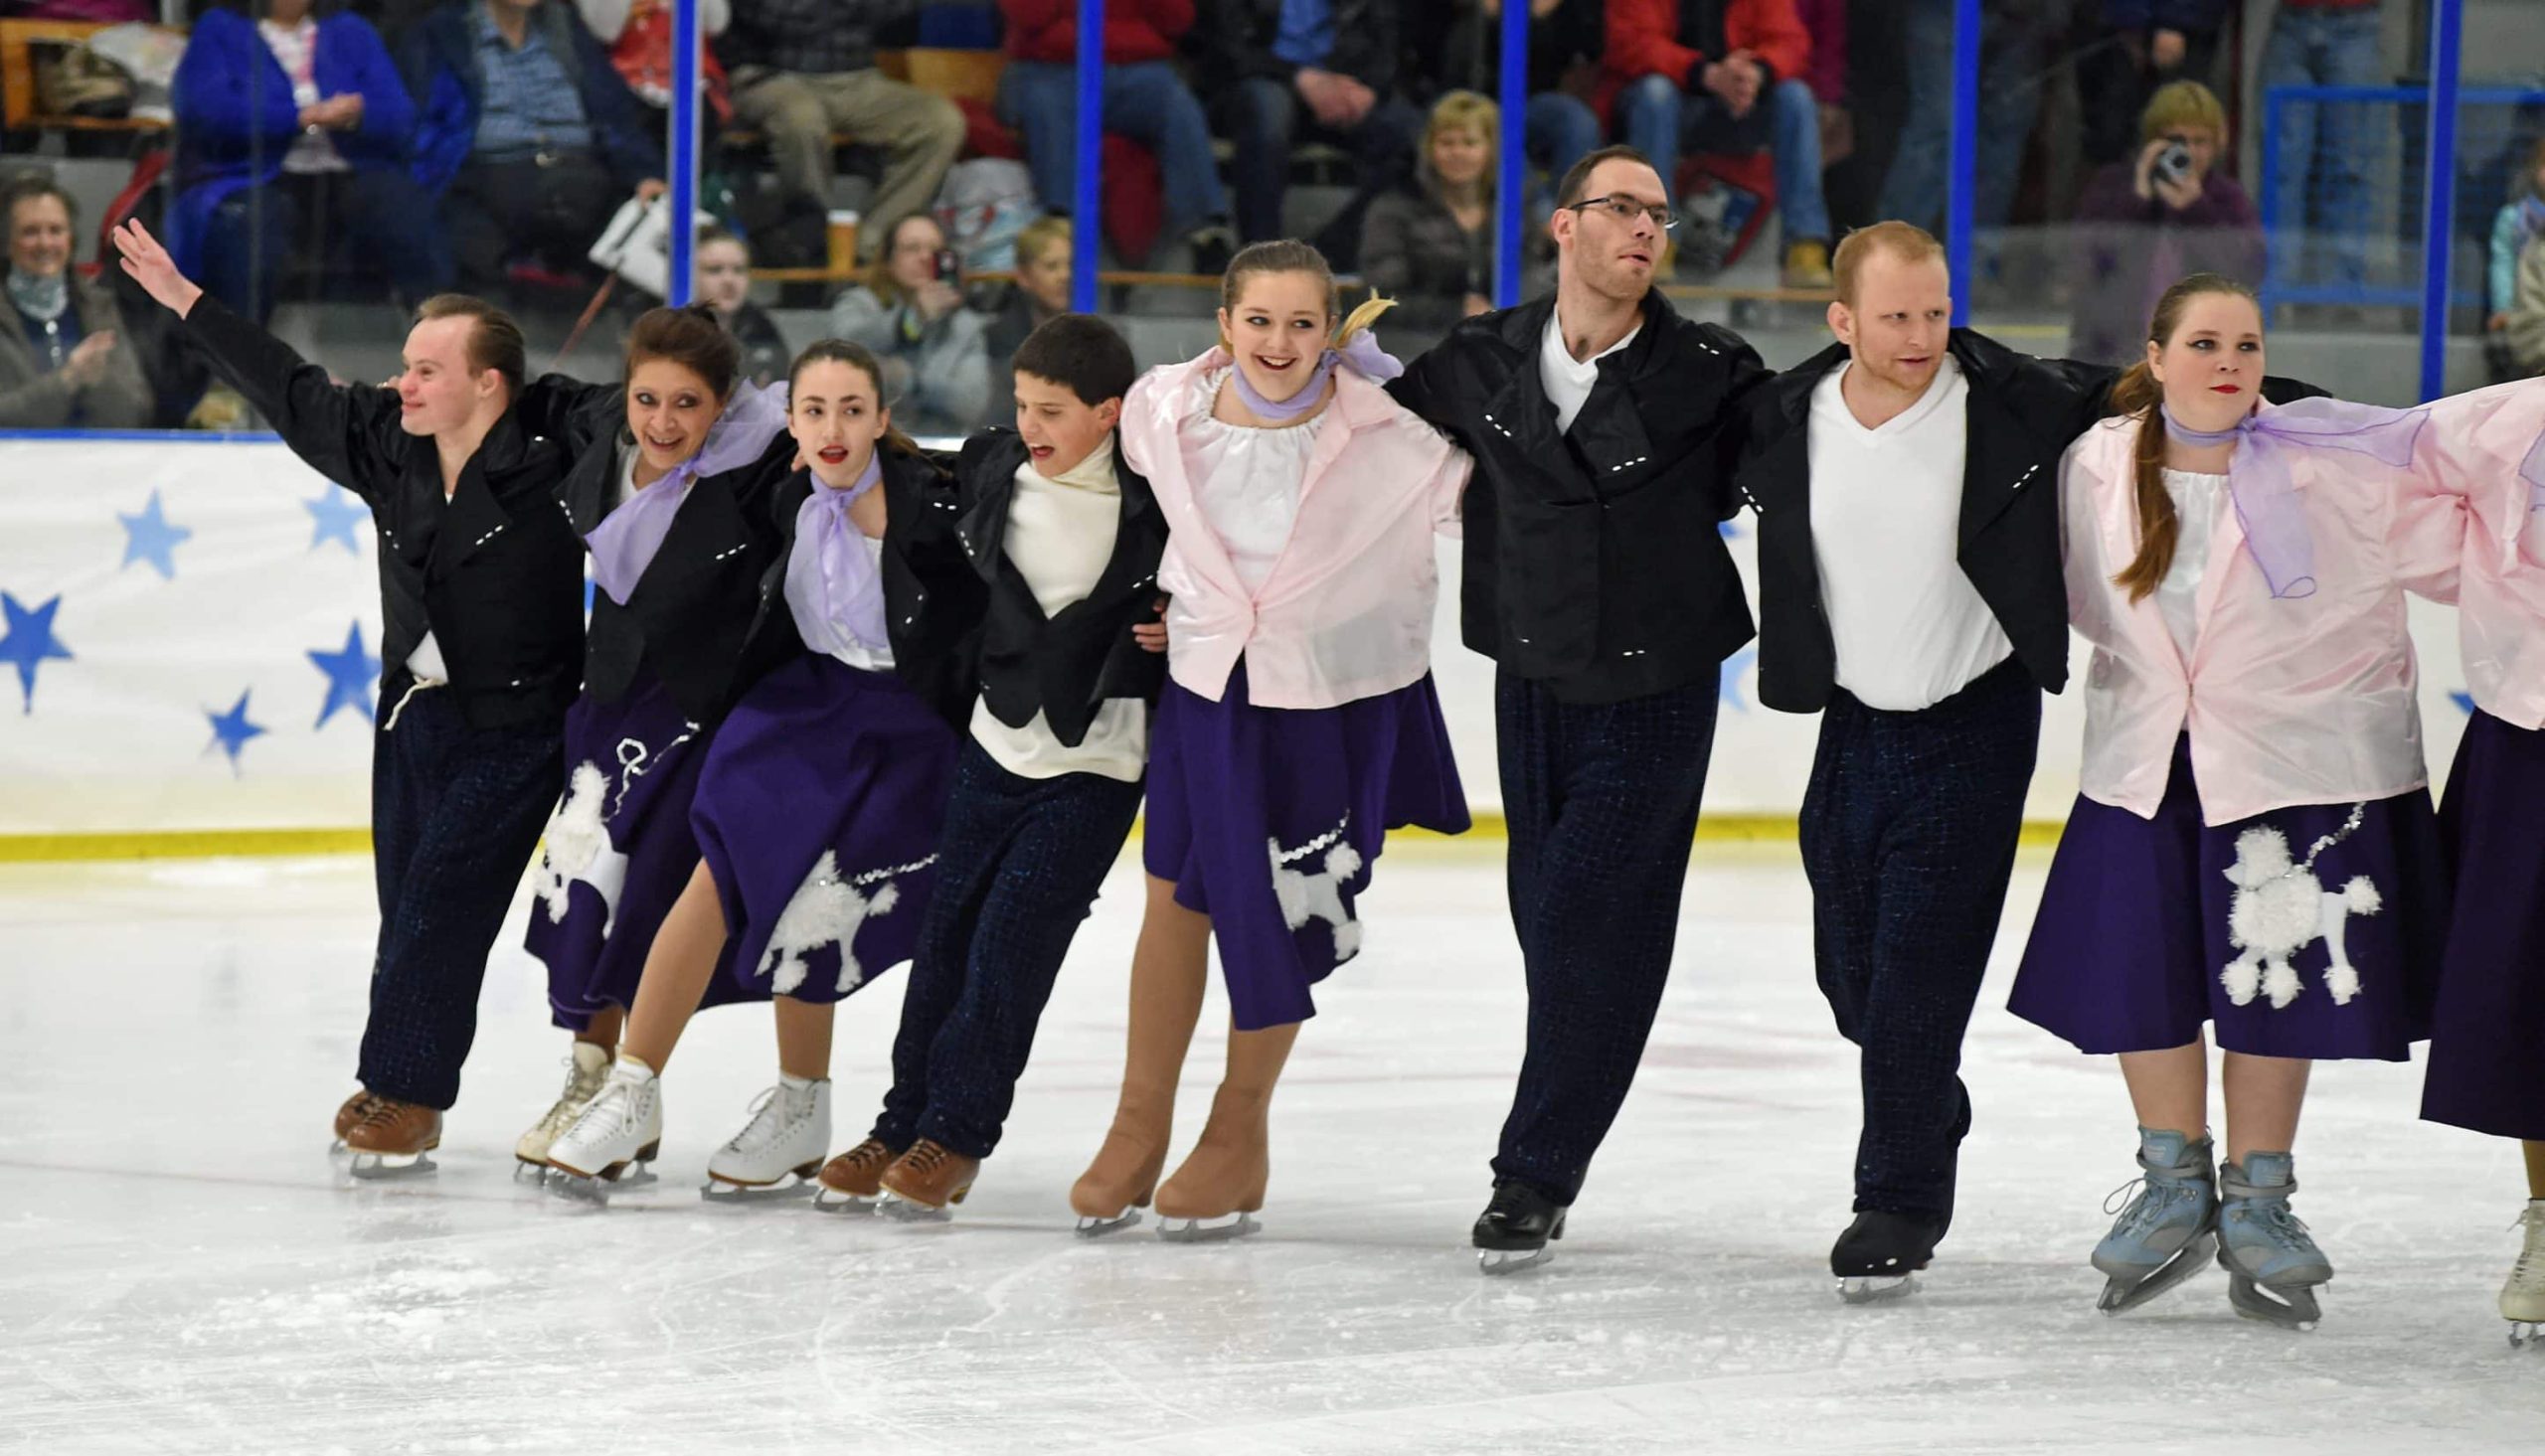 Gliding Stars Presents 13th Annual Ice Show – a great time for the entire family!